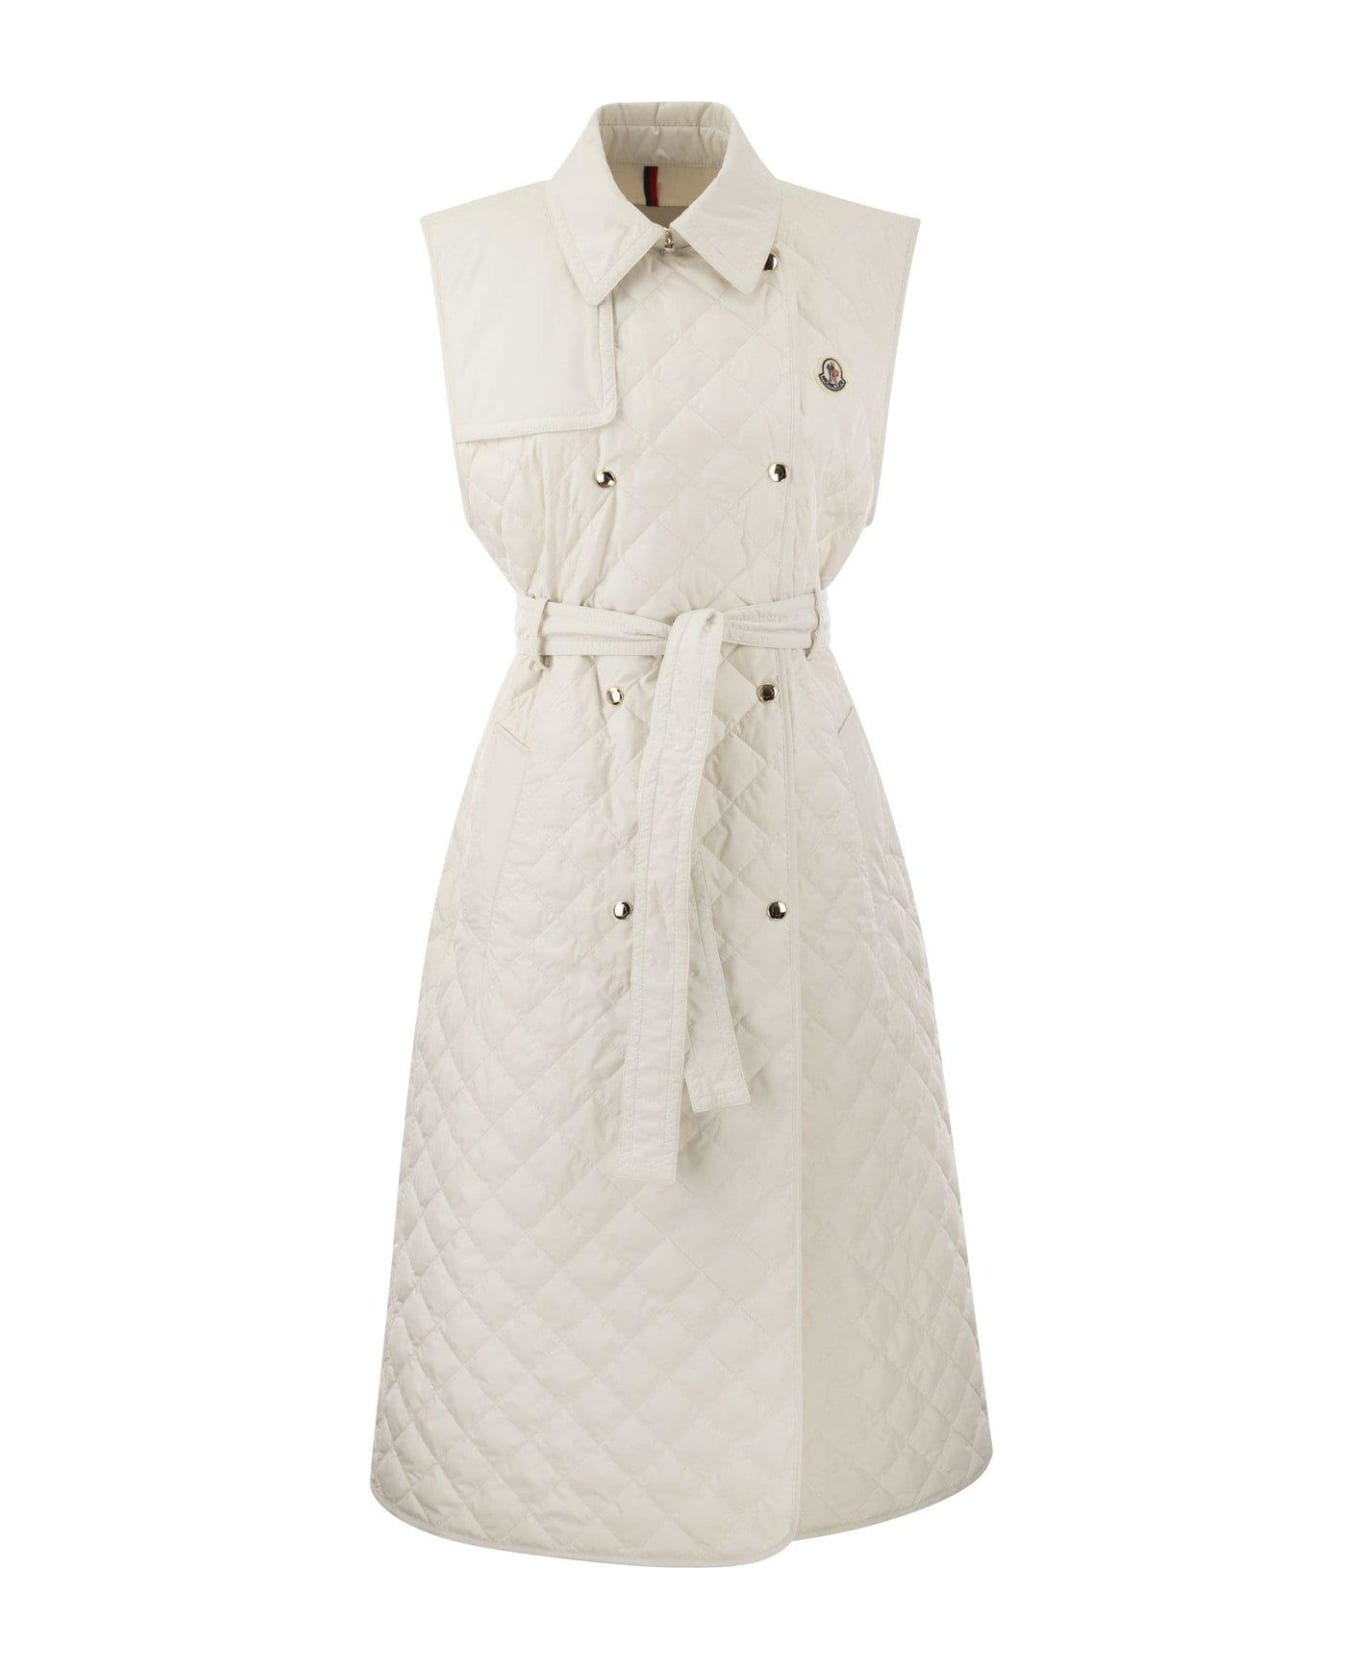 Moncler Sleeveless Quilted Trench Coat - Bianco レインコート